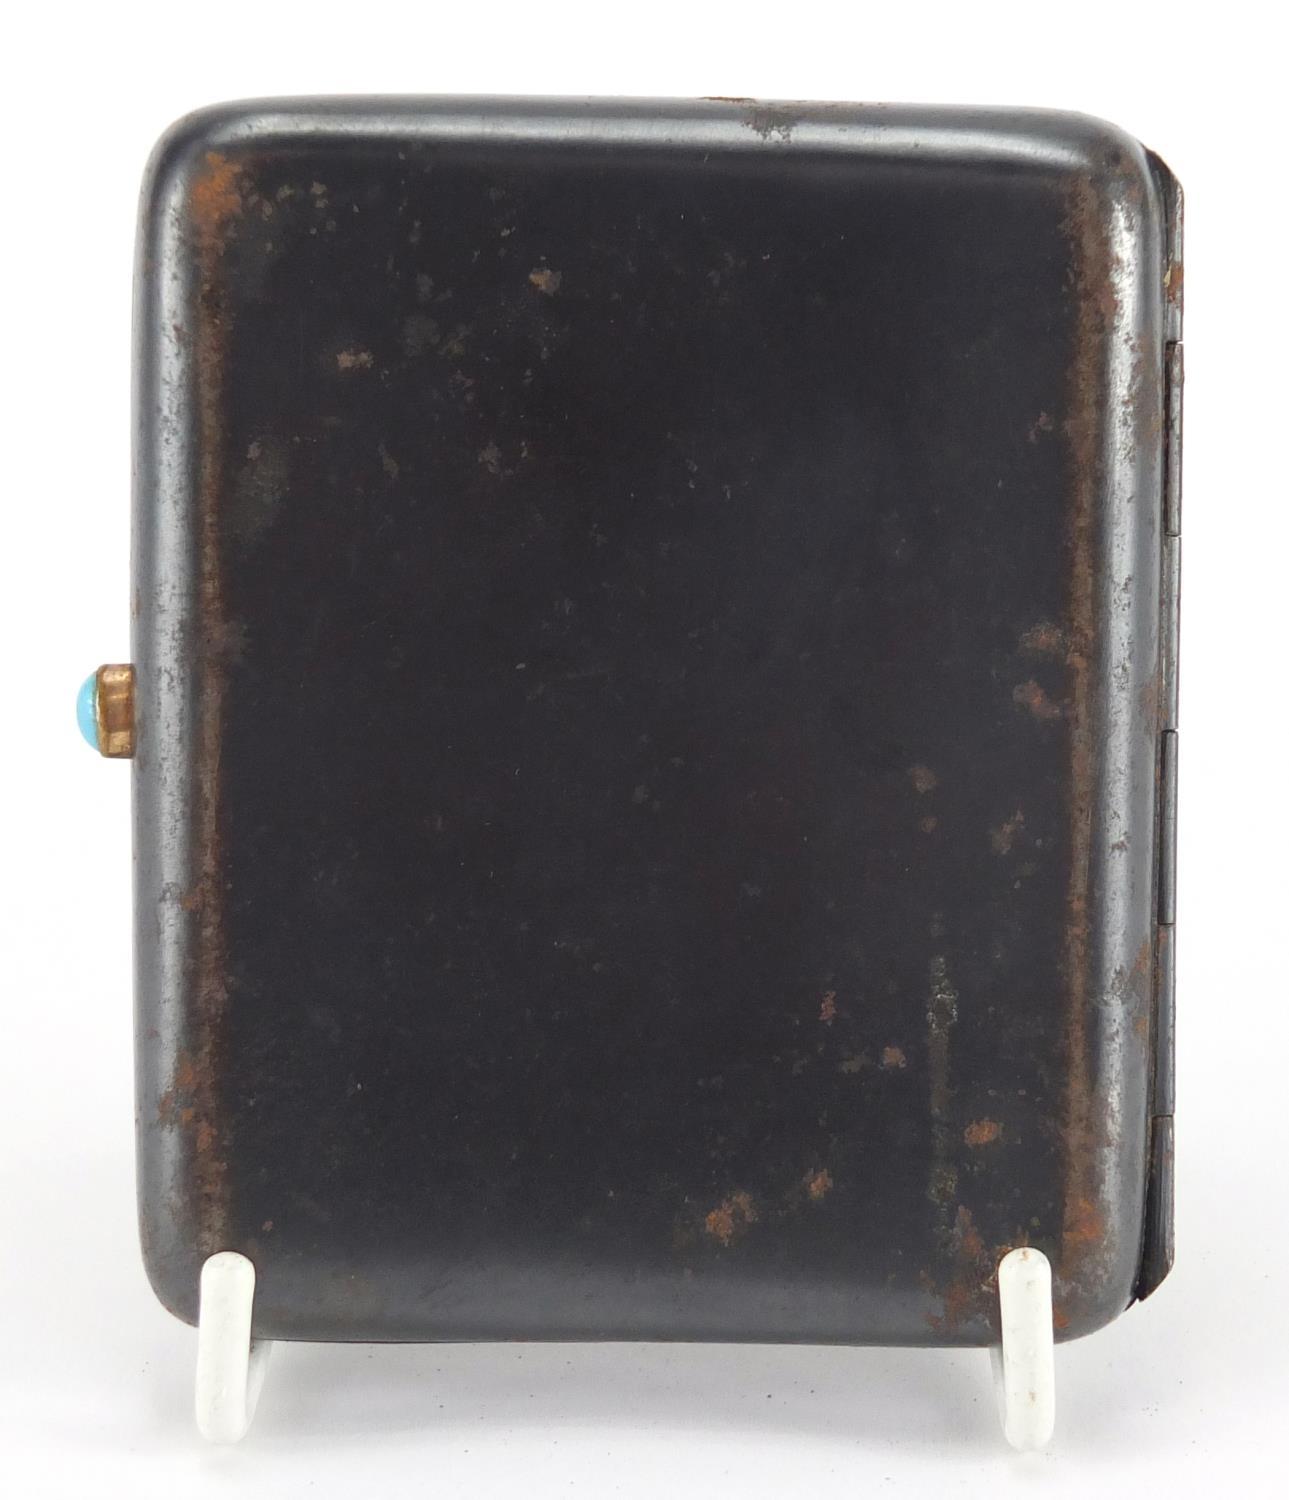 Rectangular silver and gunmetal cigarette case, decorated with a gentleman on a motorcycle, London - Image 2 of 4